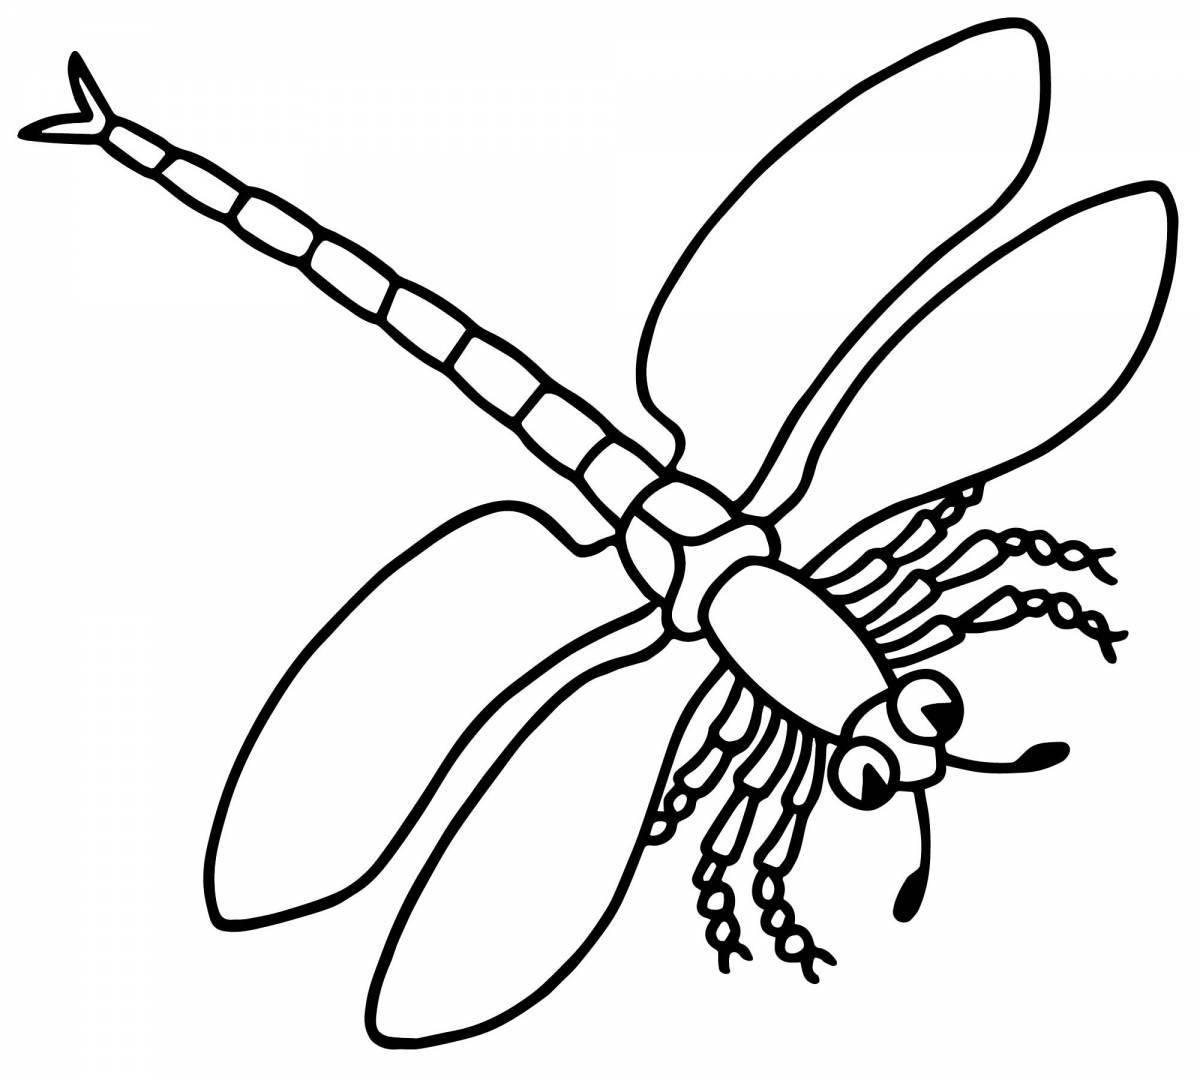 Adorable dragonfly coloring book for kids